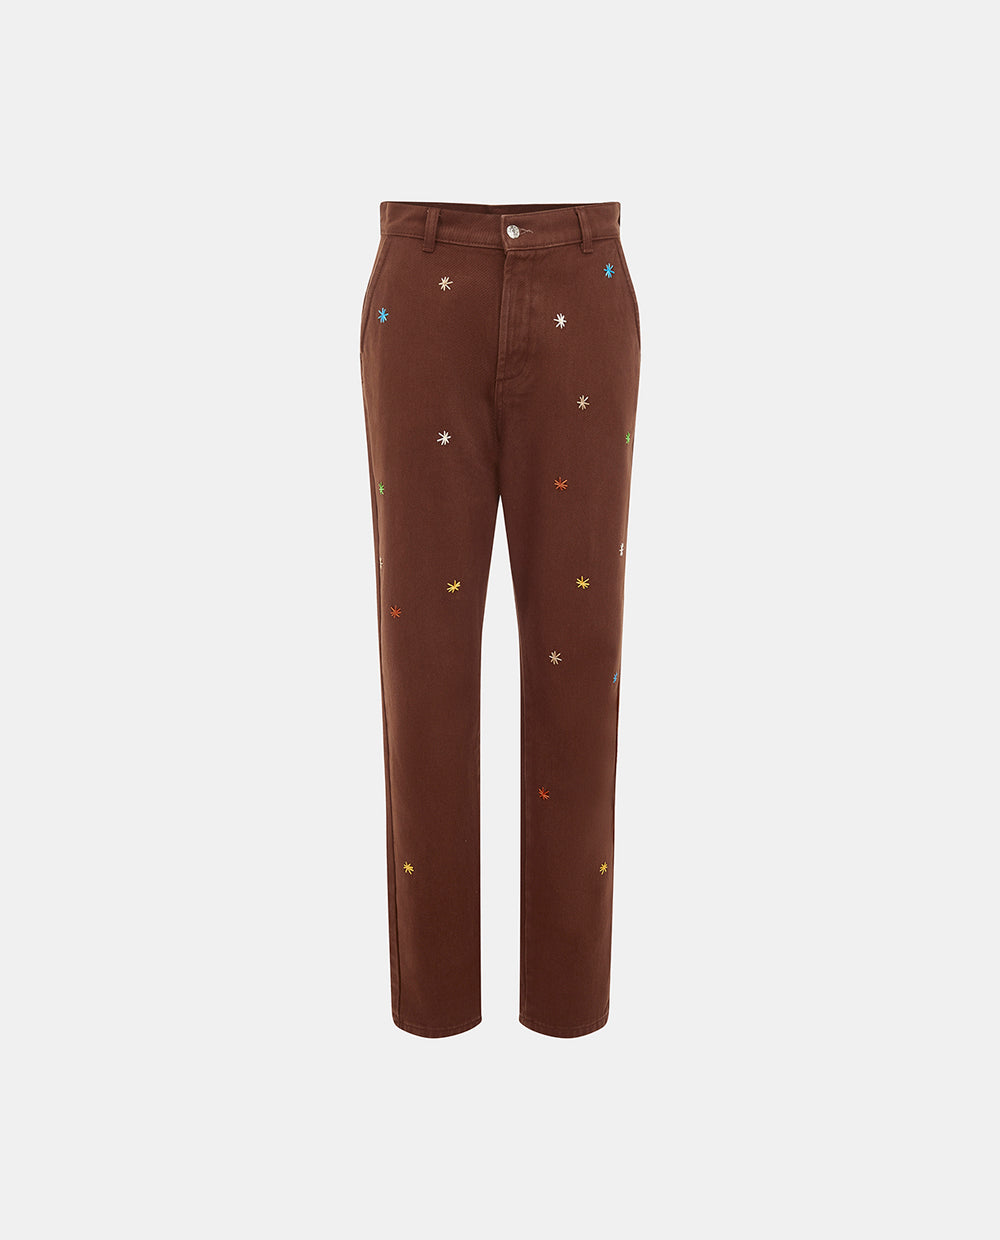 STAR BROWN JEANS